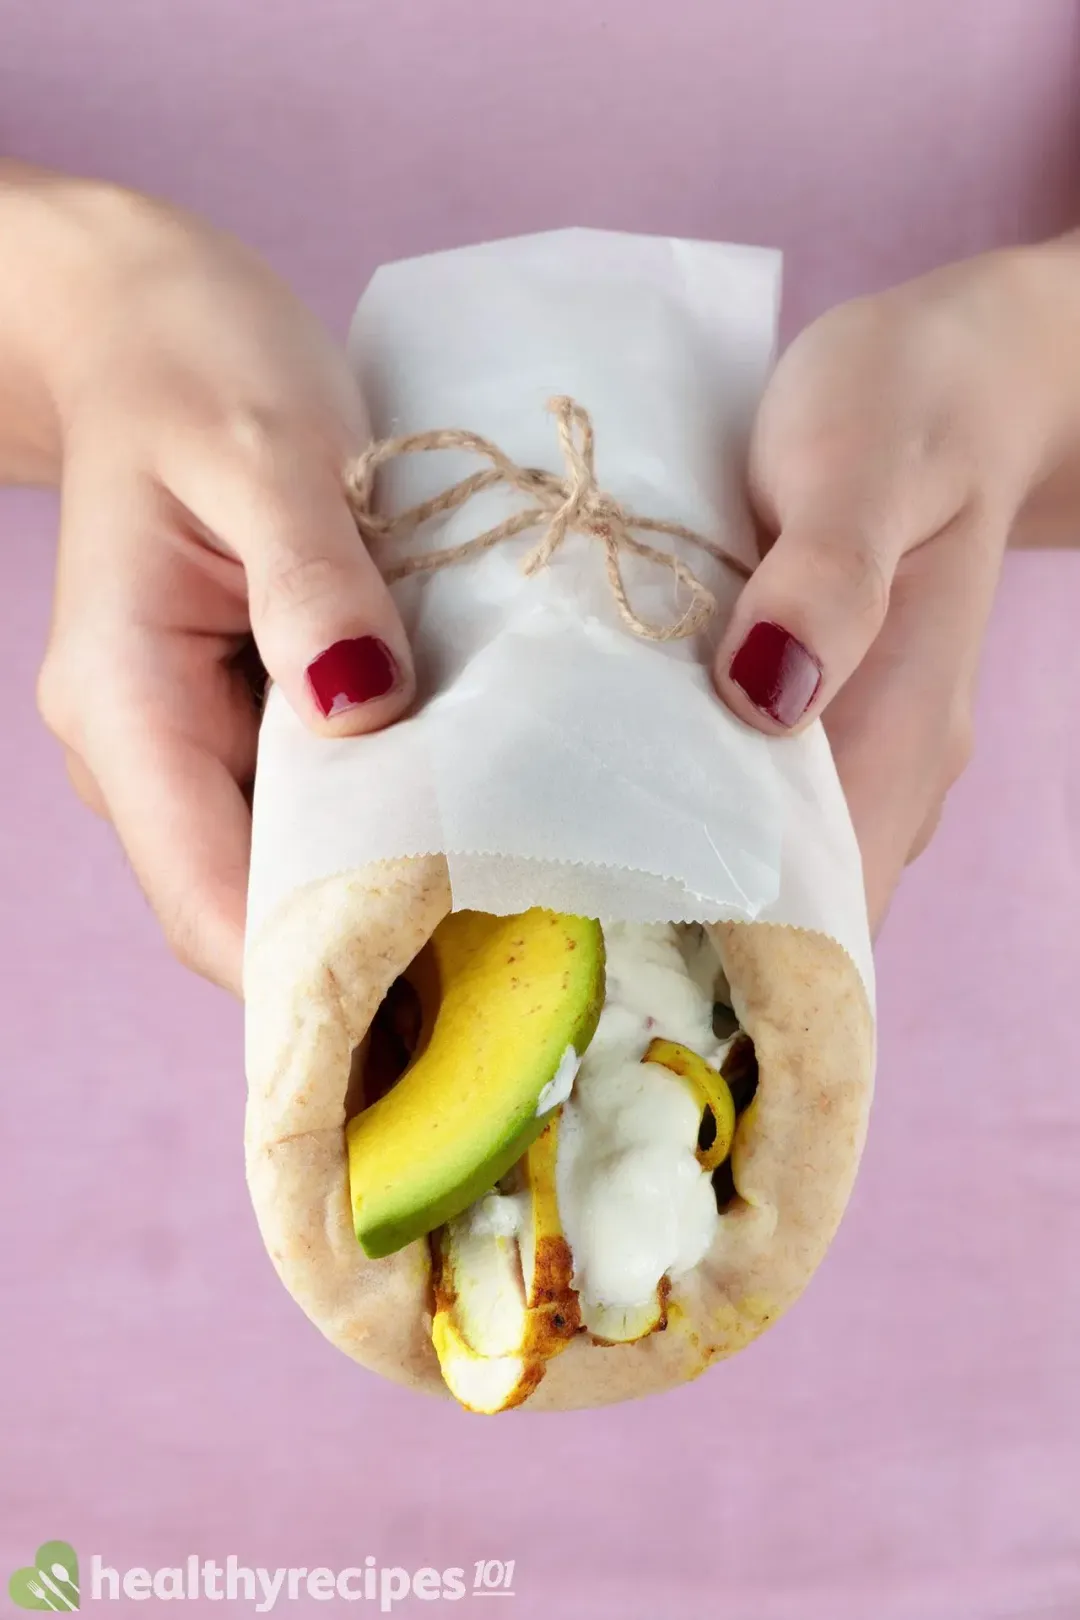 Two hands presenting a chicken shawarma wrapped in parchment and tied with brown twine